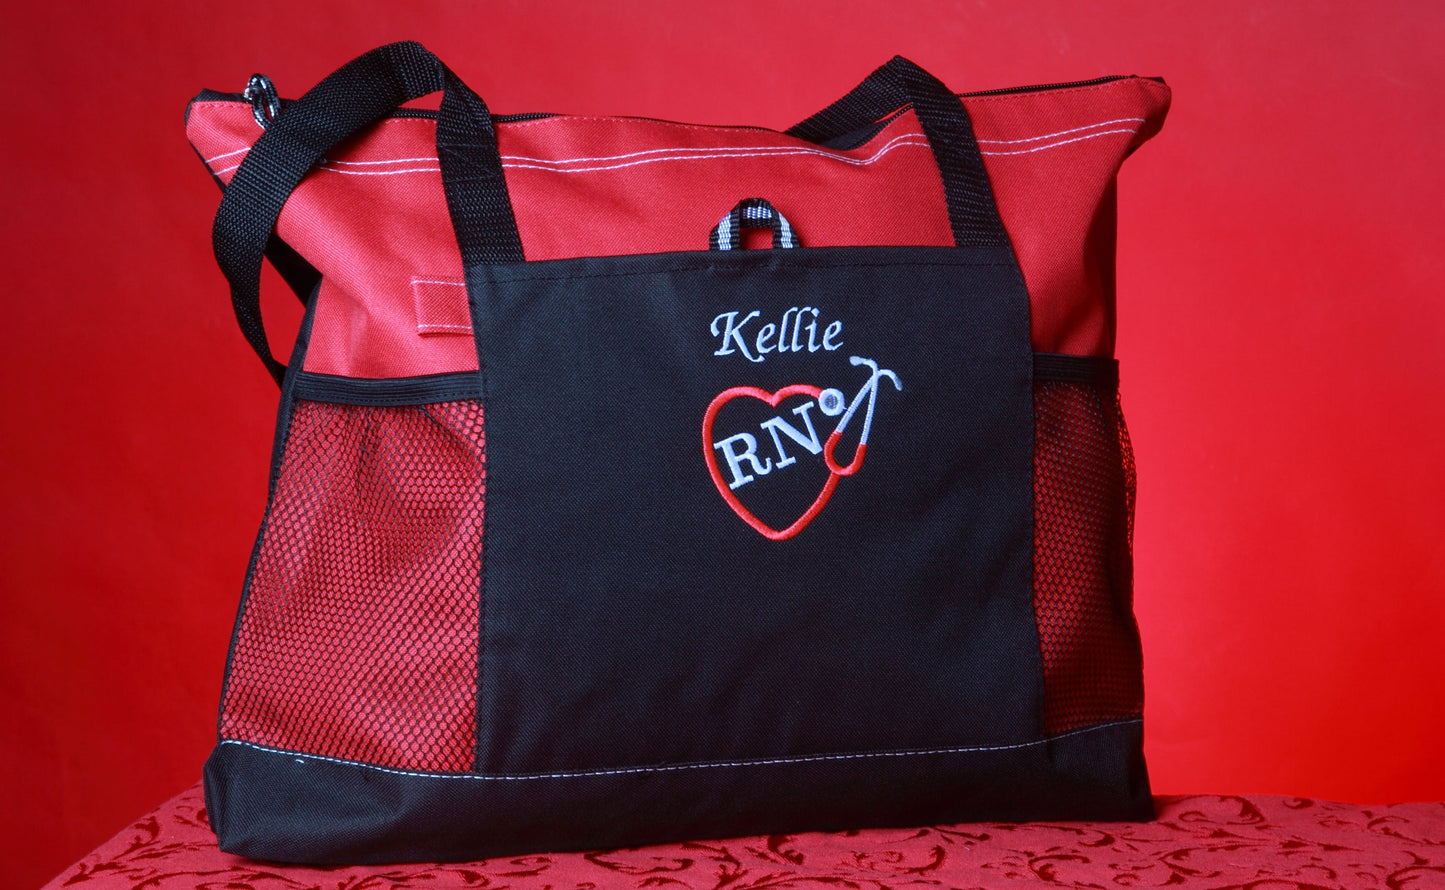 Nurse Tote Bags - Personalized  For RN, LPN, CNA, CMA, MA, ANY TITLE Red